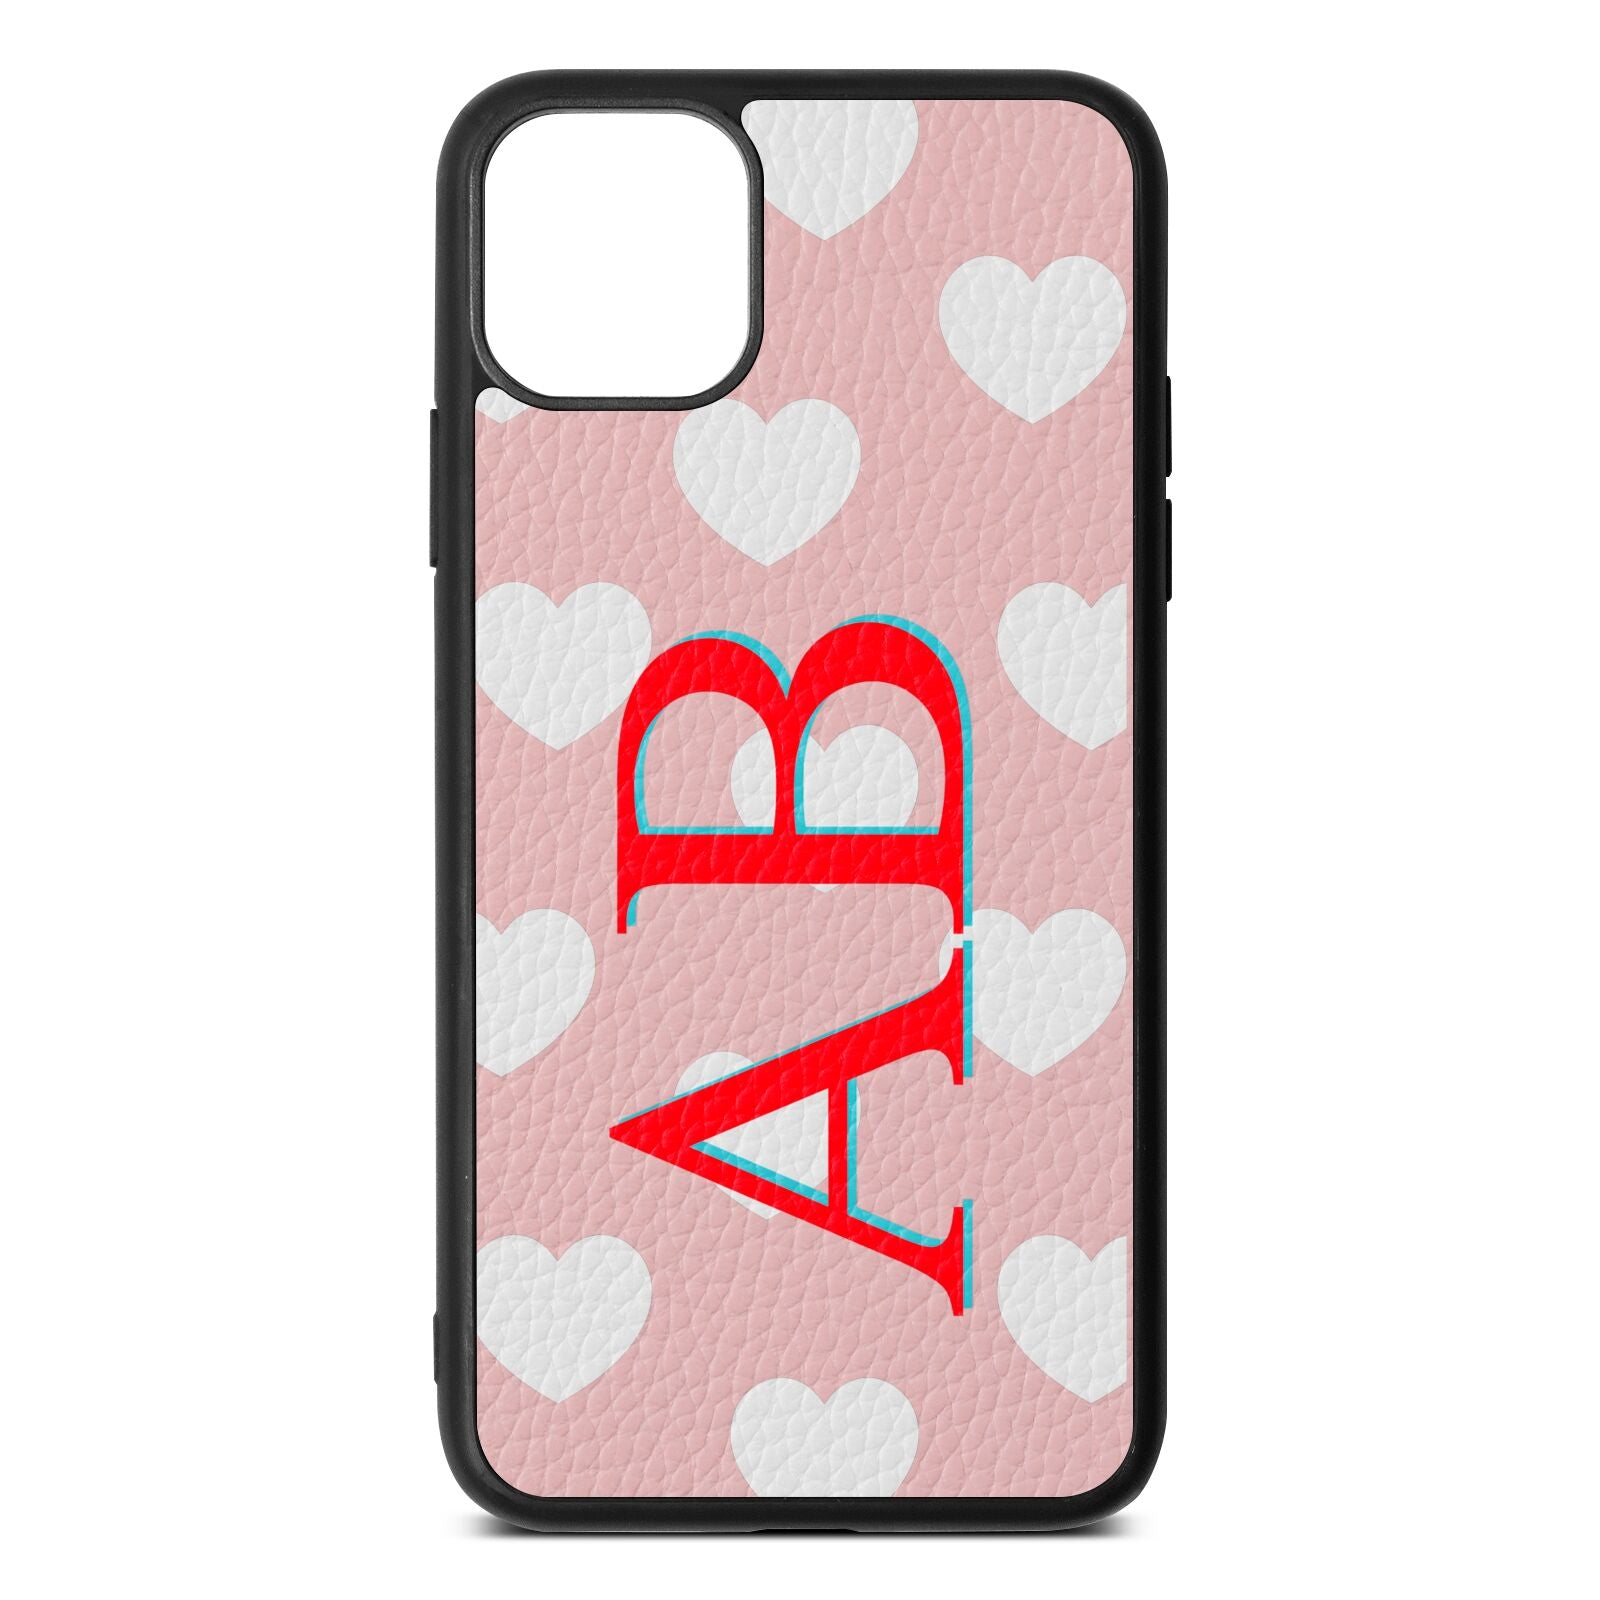 Heart Print Initials Pink Pebble Leather iPhone 11 Pro Max Case